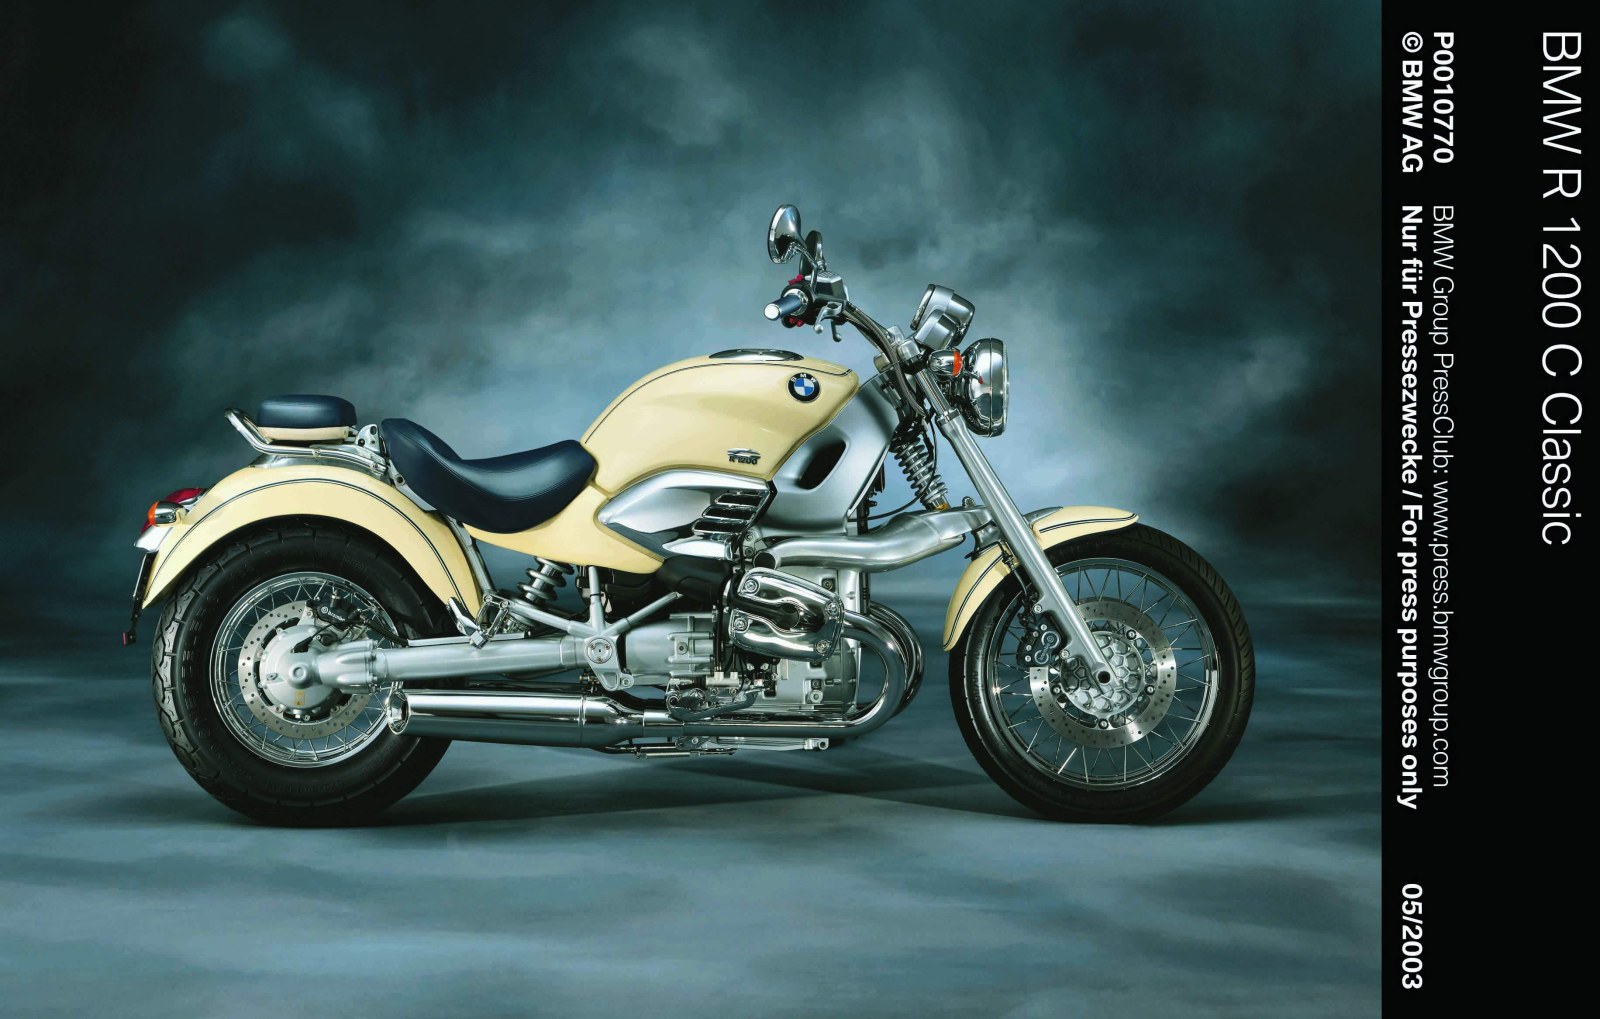 Bmw r1200c classic specifications #1